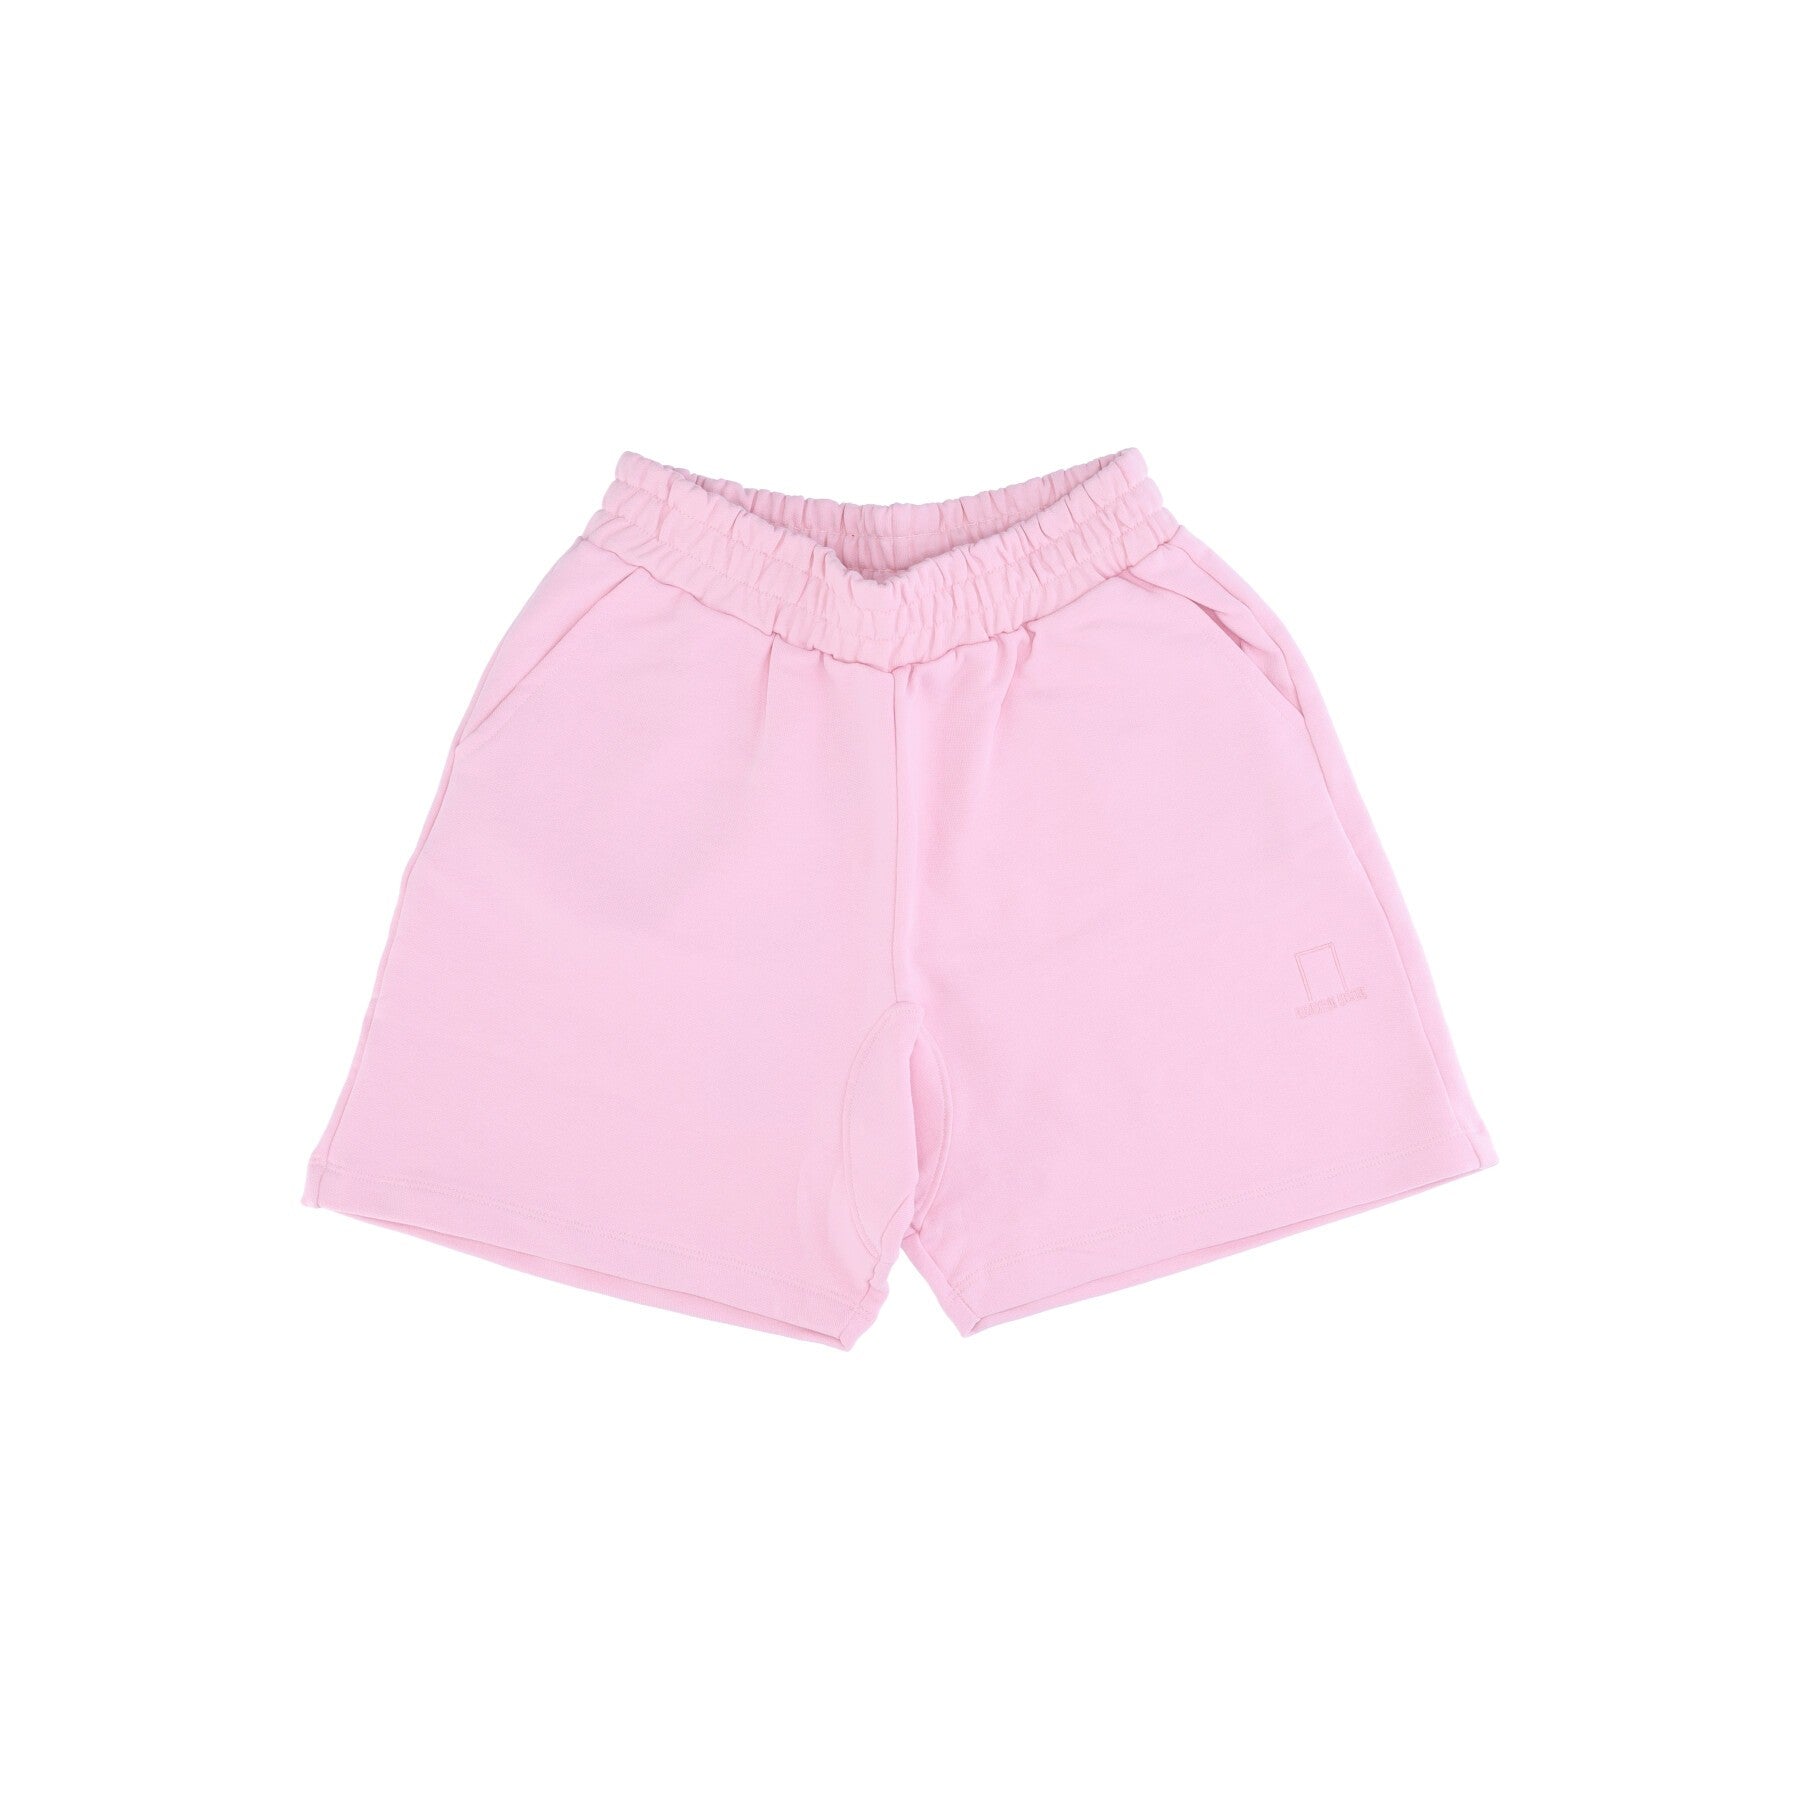 Men's Tracksuit Shorts Embroidered Logo Shorts Pink